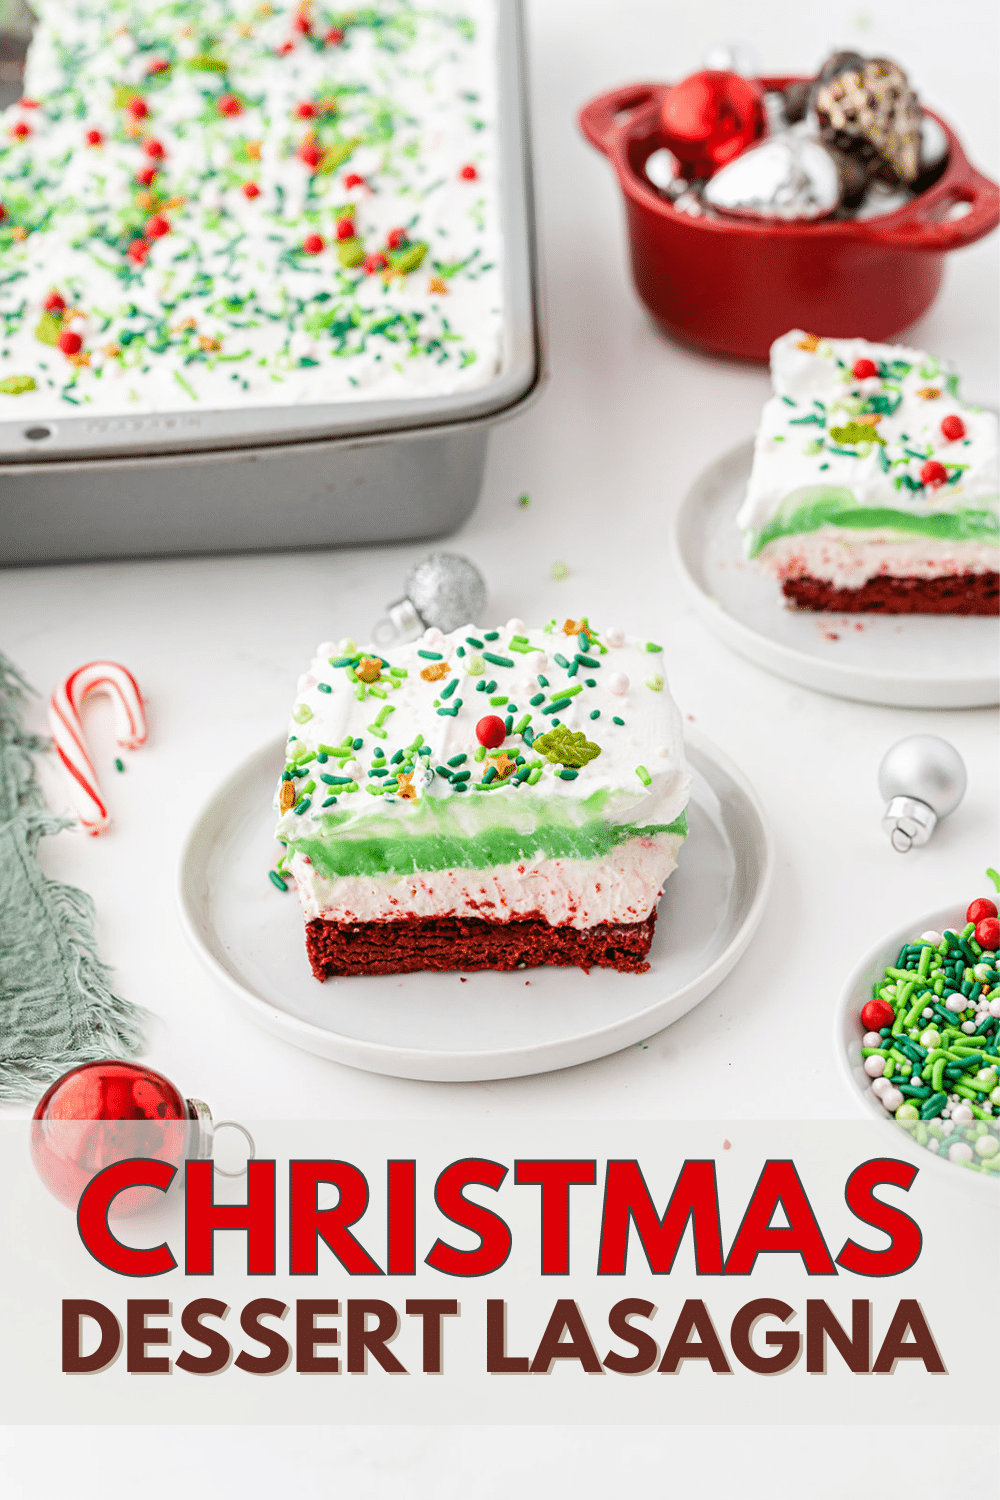 Christmas Dessert Lasagna is a delectable treat that combines the flavors of traditional Christmas desserts in a unique lasagna form. It features layers of luscious ingredients such as creamy chocolate mousse